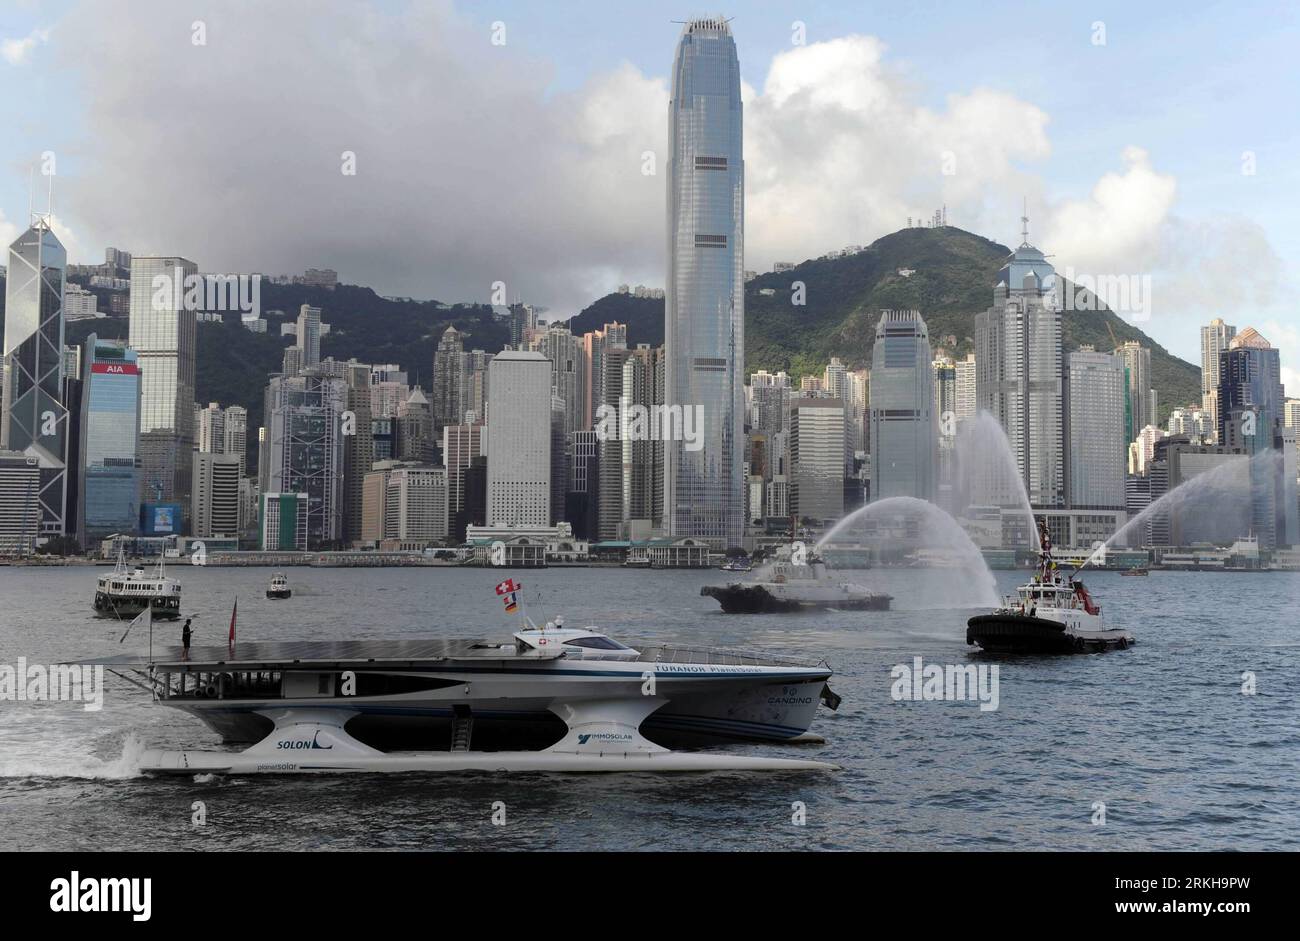 Bildnummer: 55765020  Datum: 15.08.2011  Copyright: imago/Xinhua (110815) -- HONG KONG, Aug. 15, 2011 (Xinhua) -- MS Turanor PlanetSolar, a solar powered boat, sails at the Victoria Harbor in Hong Kong, south China, Aug. 15, 2011. The solar powered catamaran, MS Turanor PlanetSolar, arrived at Hong Kong on Monday. PlanetSolar, a 31-meter-long ship with a total of 500 square meters solar battery, will anchor in Hong Kong from Aug. 15 to Aug. 23, as a waypoint during its voyage around the world. (Xinhua/Song Zhenping) (xzj) CHINA-HONG KONG-SOLAR CATAMARAN-MS TURANOR PLANET SOLAR-ARRIVAL (CN) PUB Stock Photo